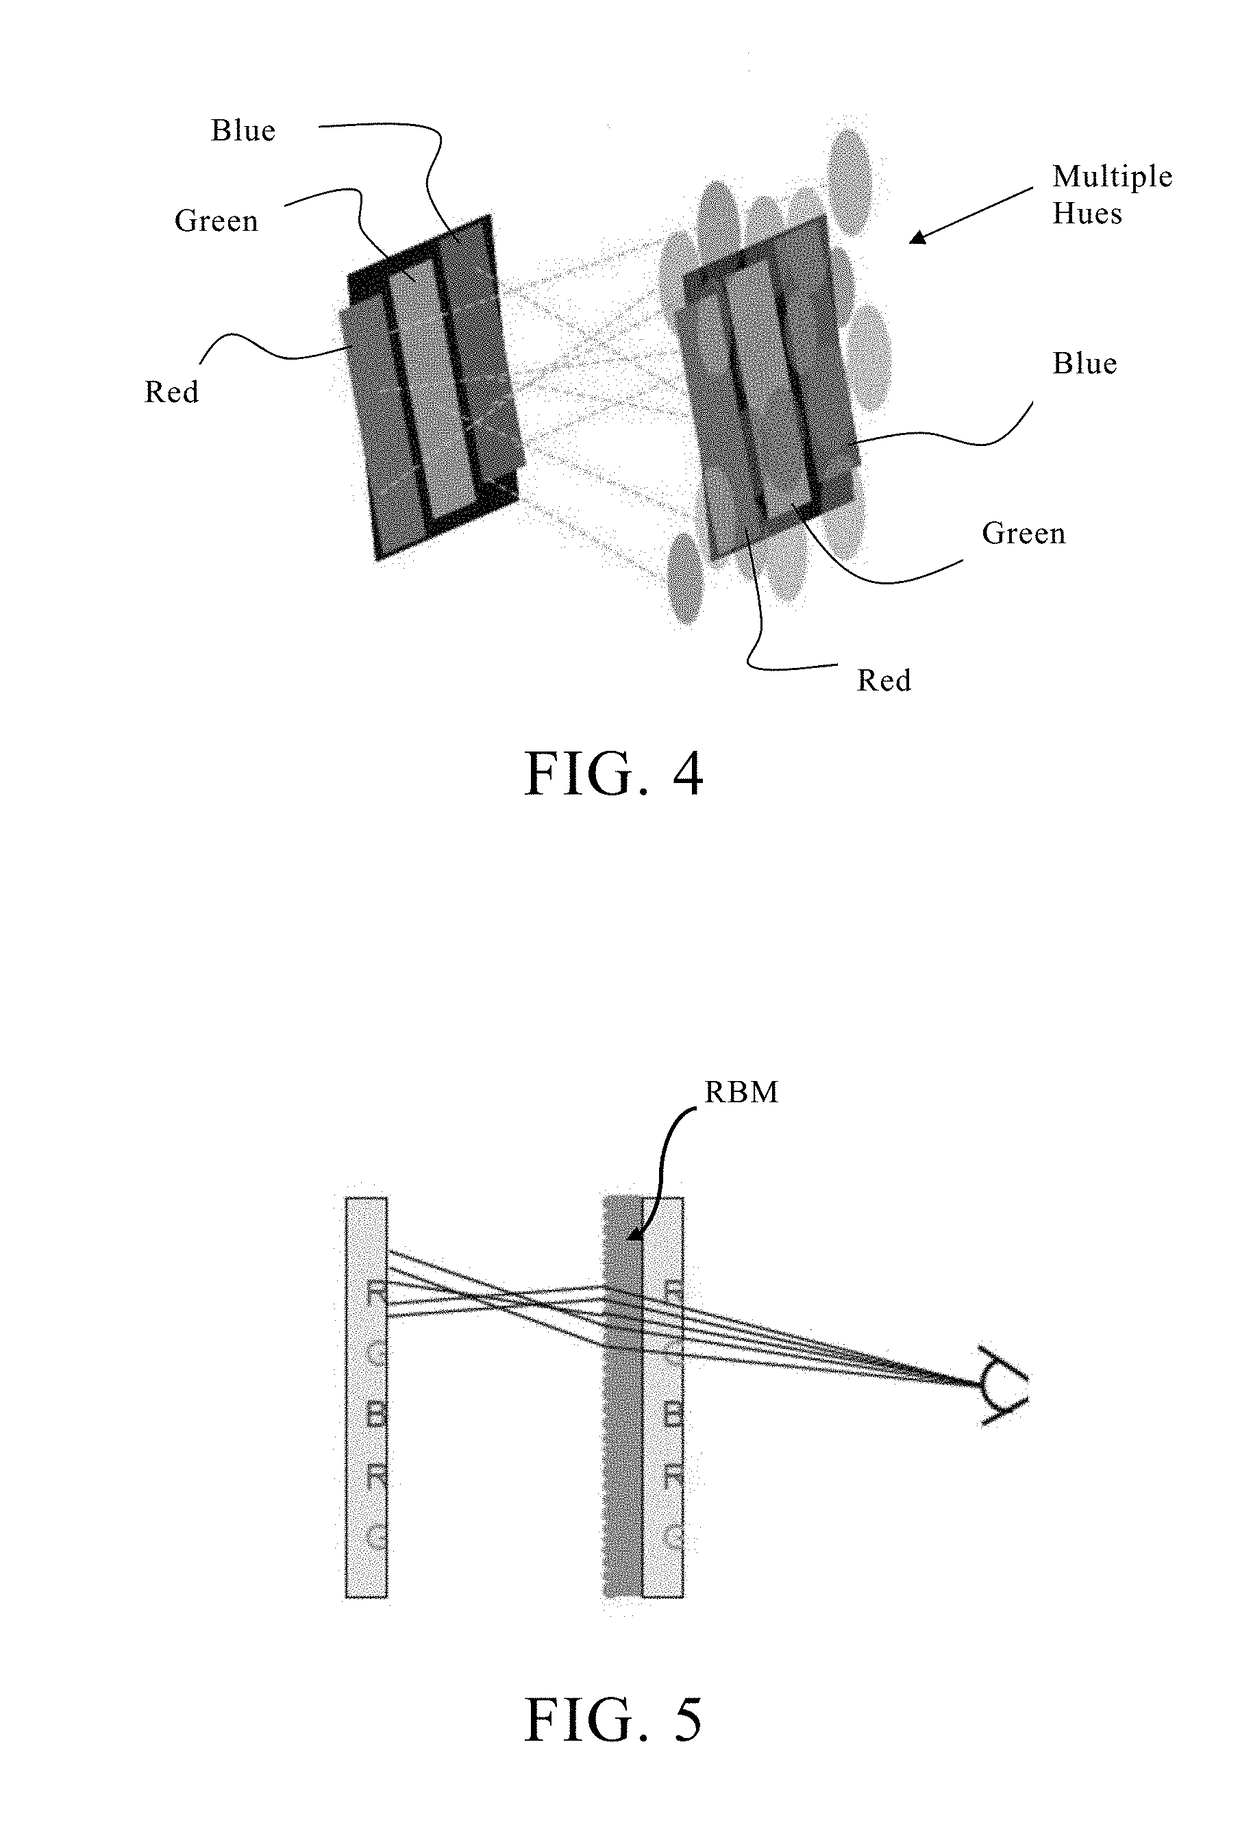 Method and system for reducing fresnel depolarization to improve image contrast in a display system including multiple displays